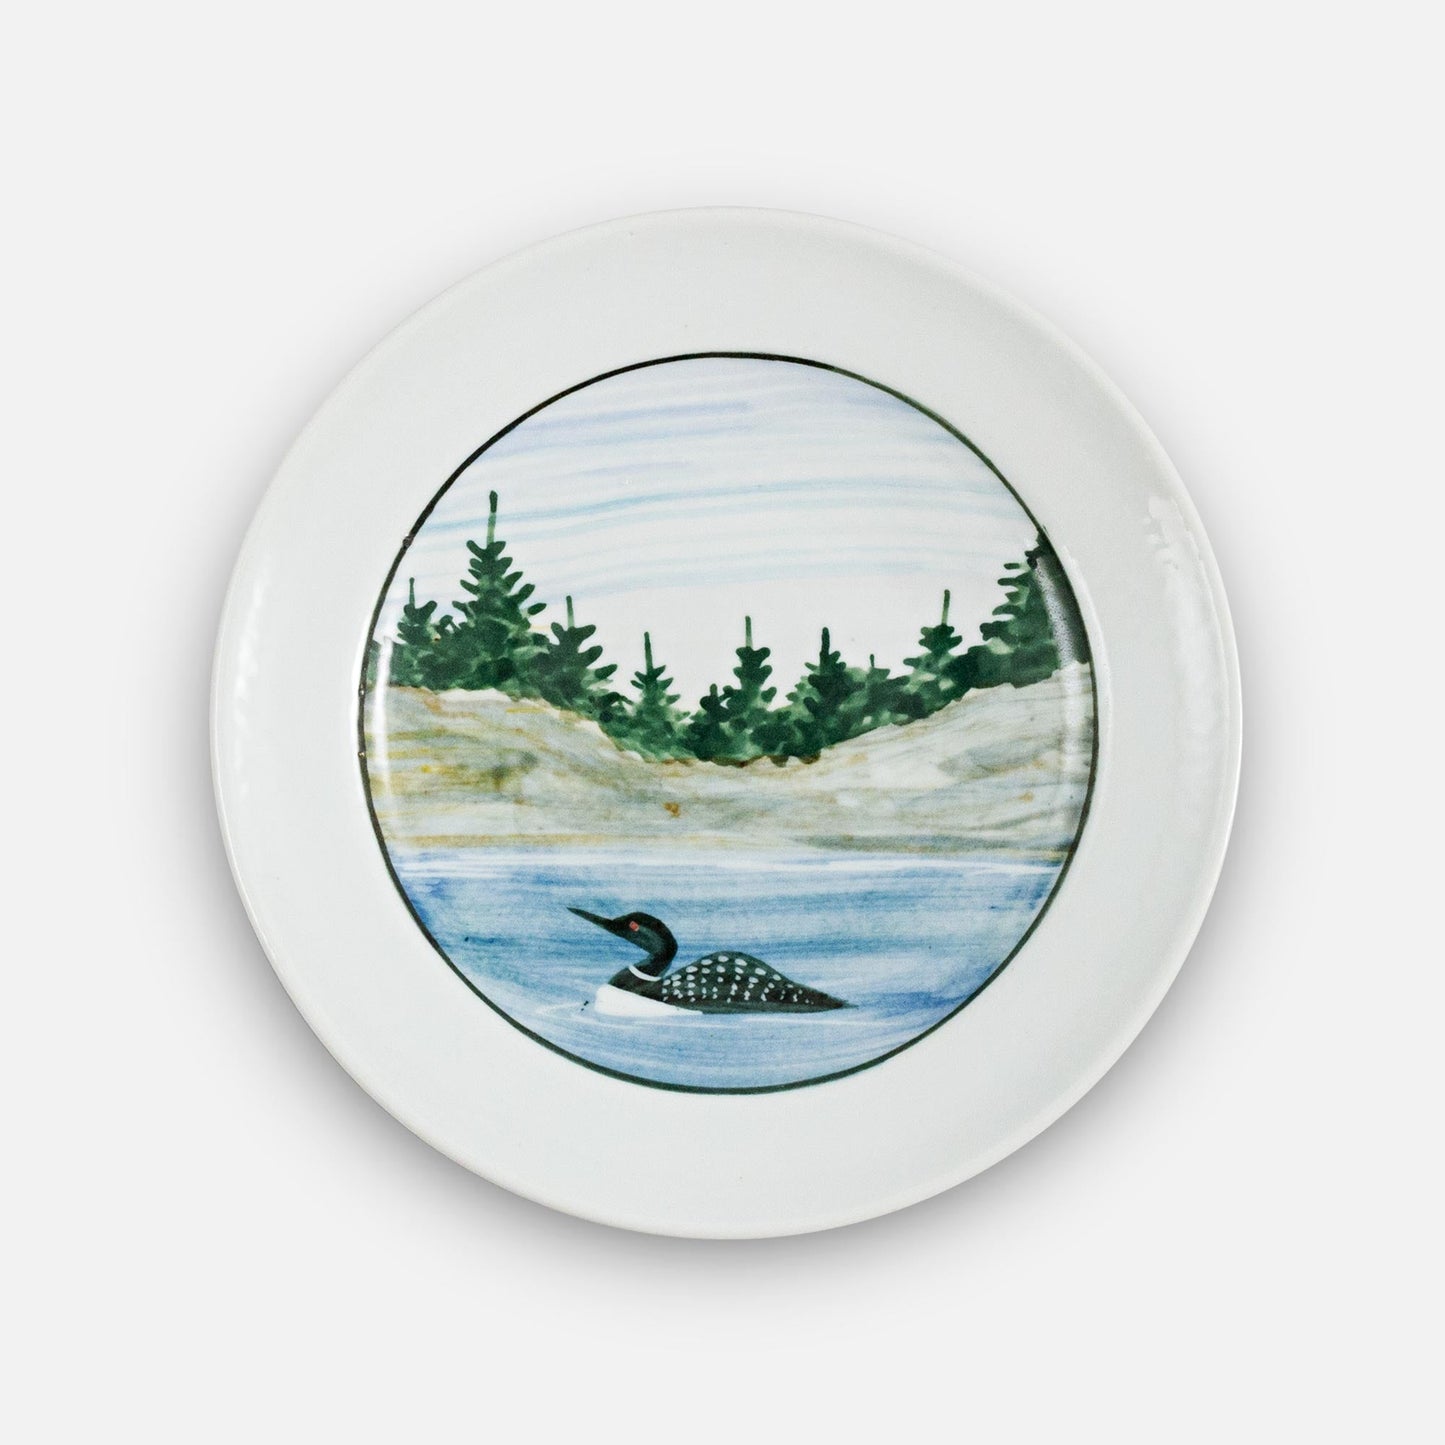 Handmade Pottery Rimless Dessert Plate made by Georgetown Pottery in Maine in Loon pattern